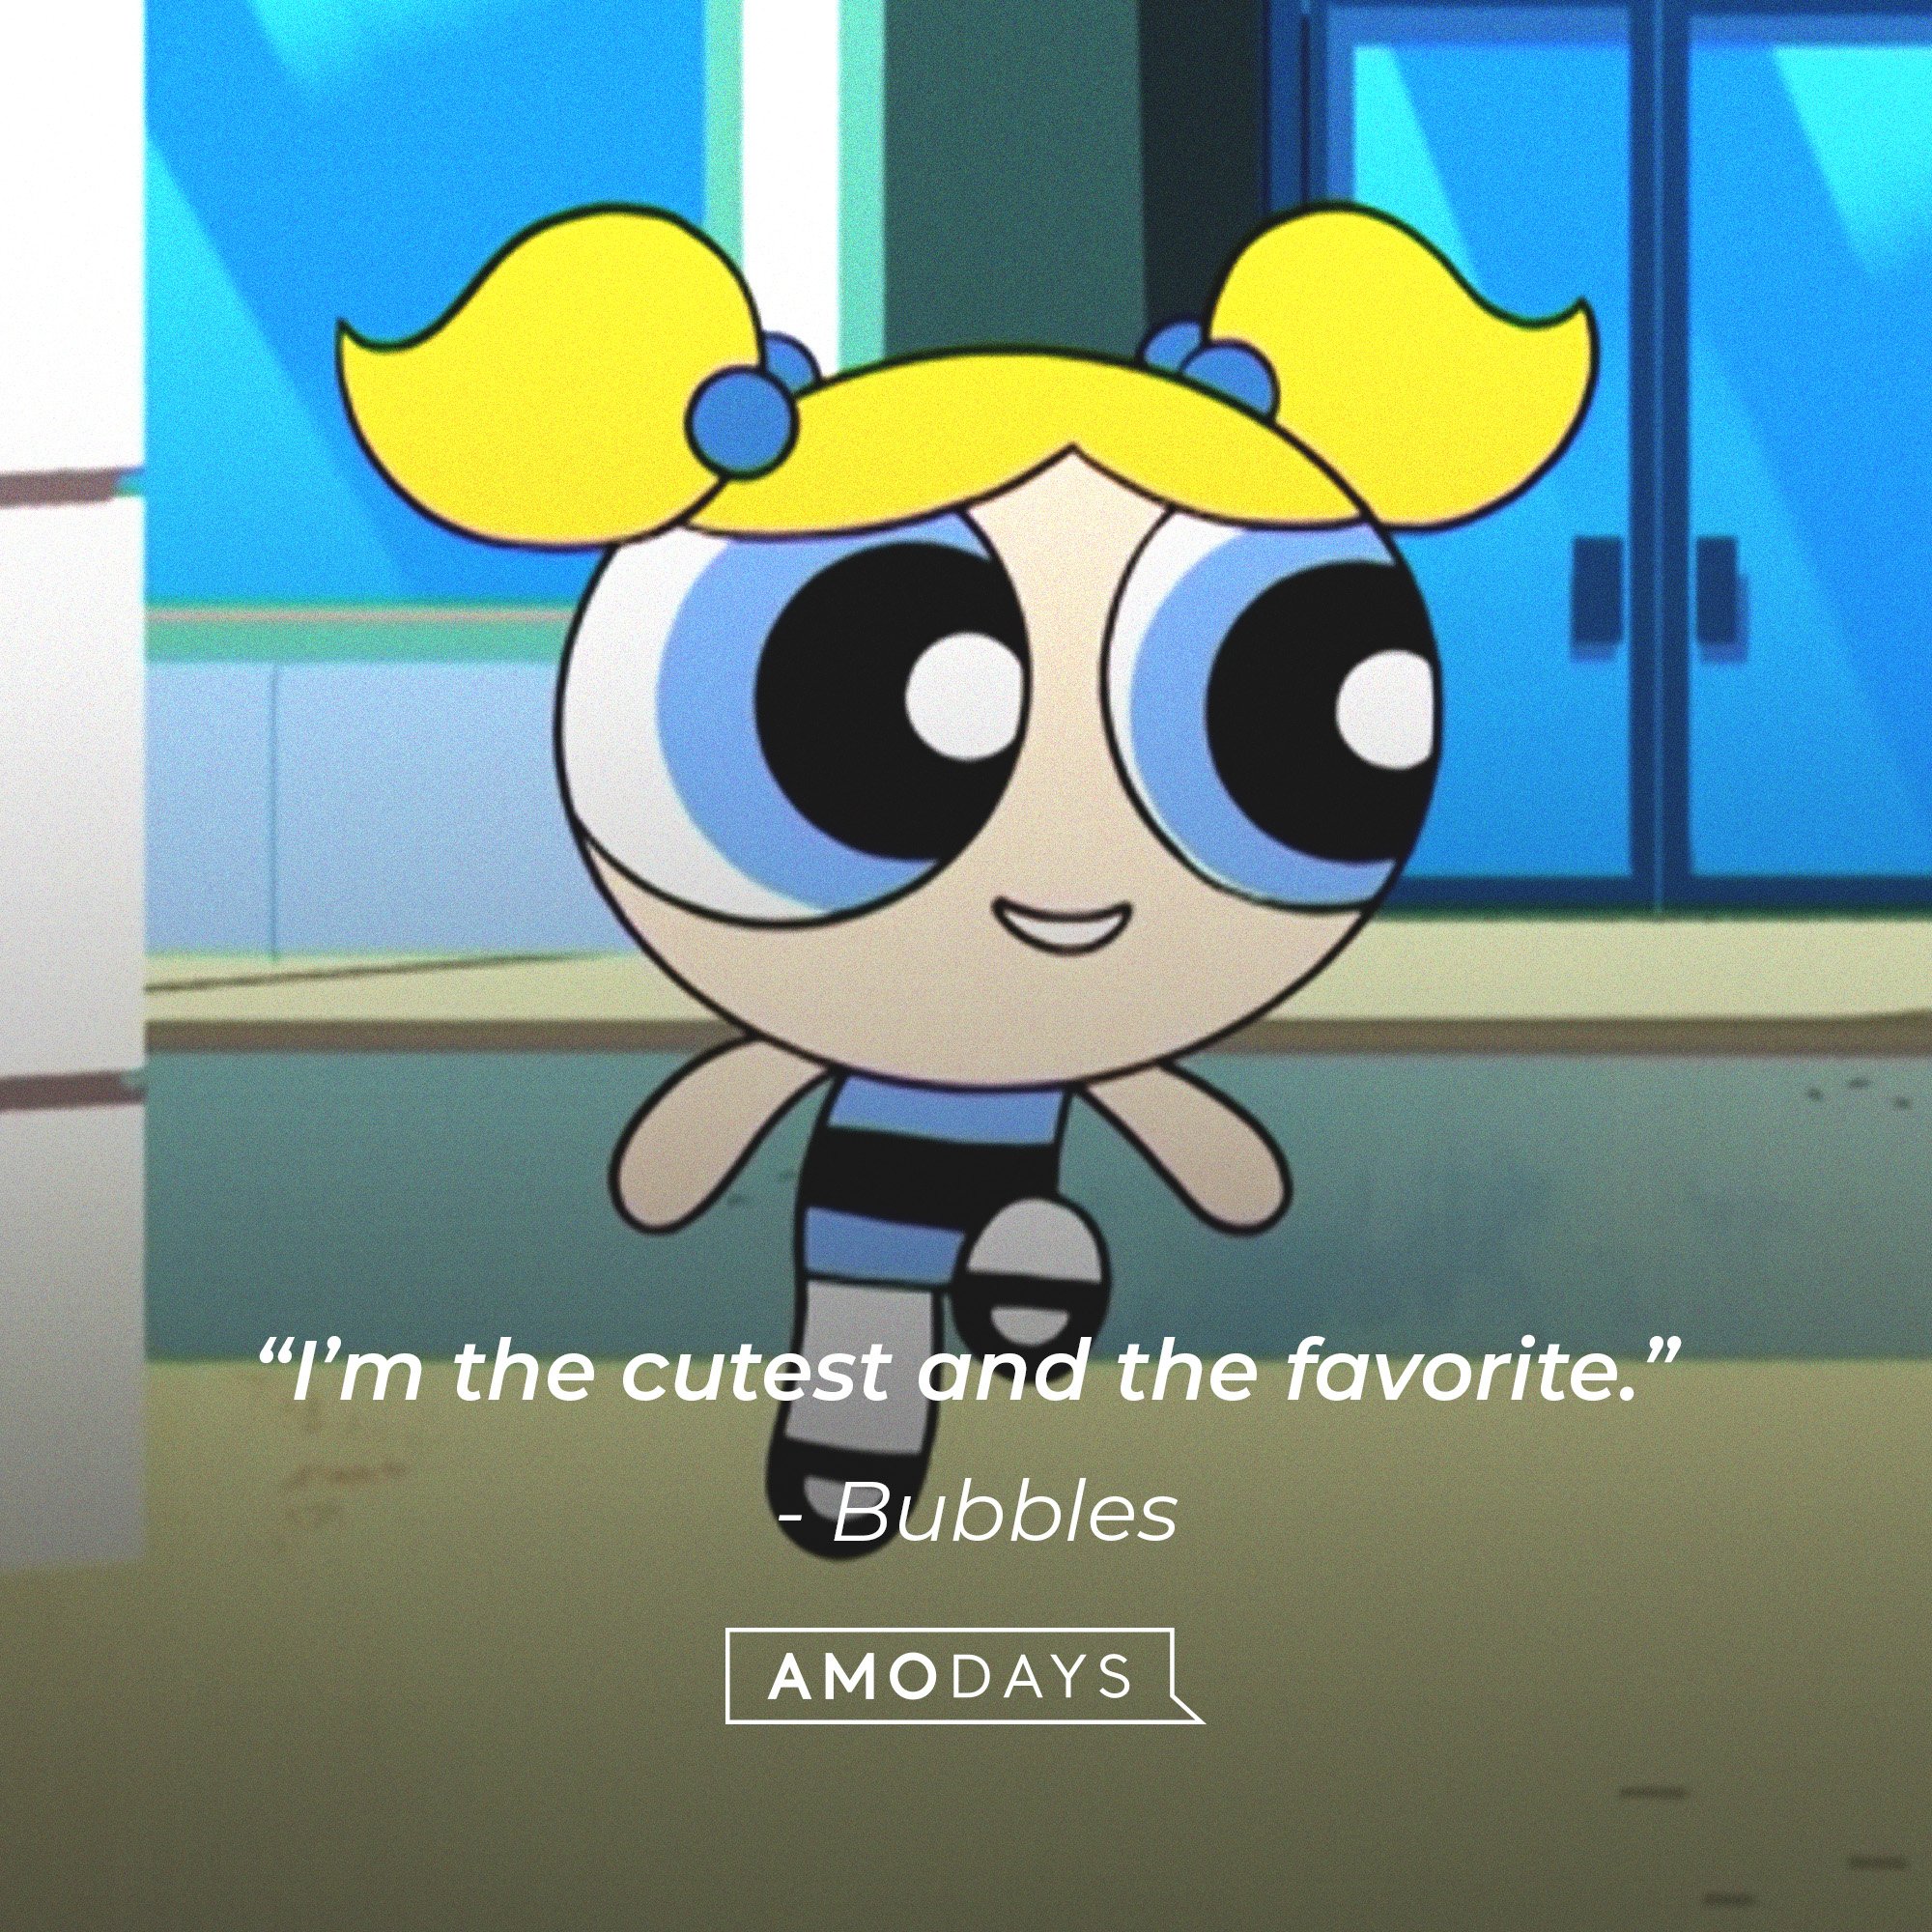 Bubble’s quote: “I’m the cutest and the favorite.”  | Image: AmoDays